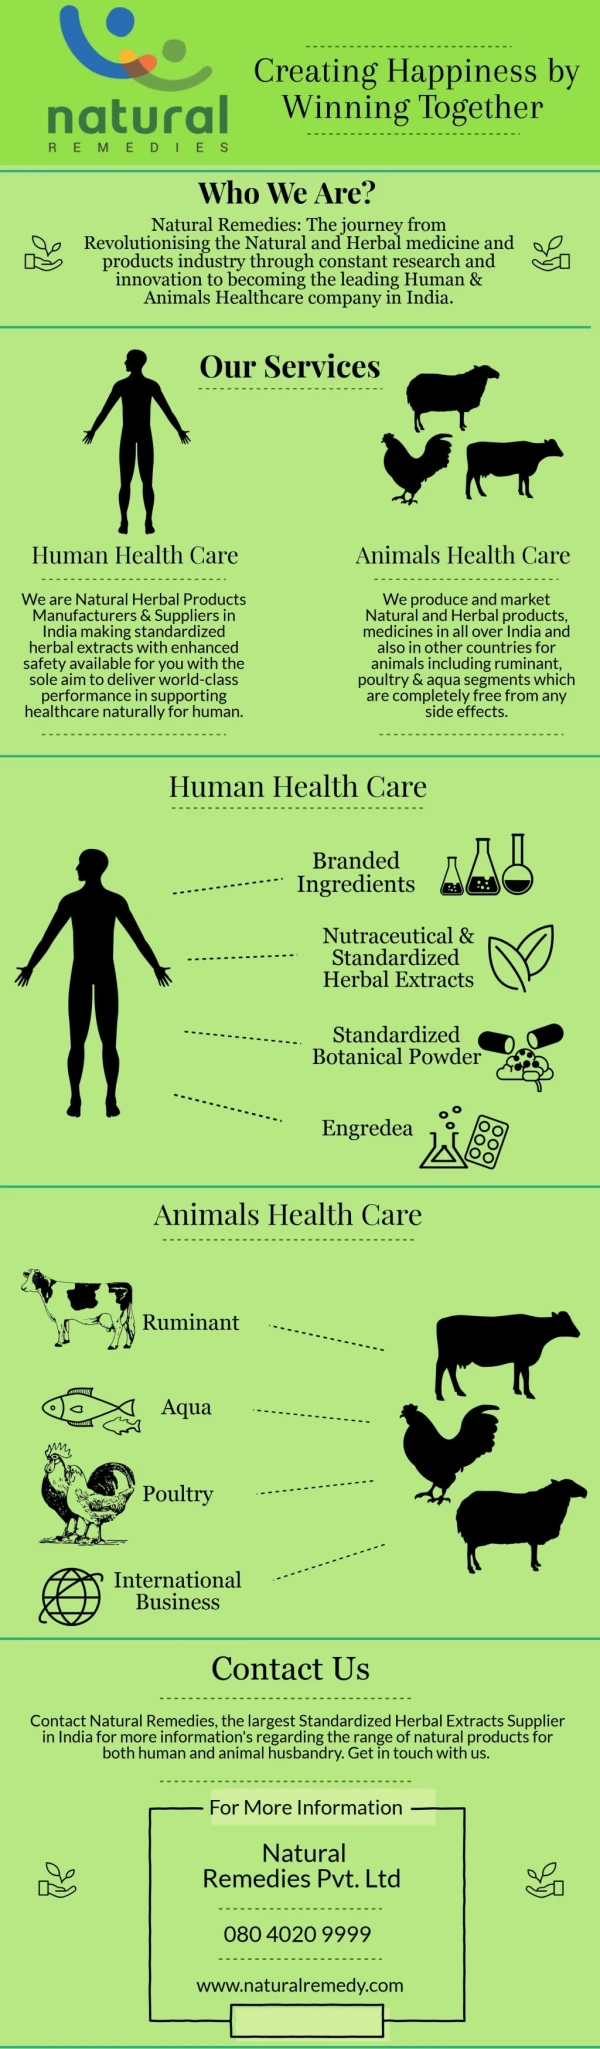 Natural Remedies India | Natural Herbal Supplements for Human and Animals Healthcare